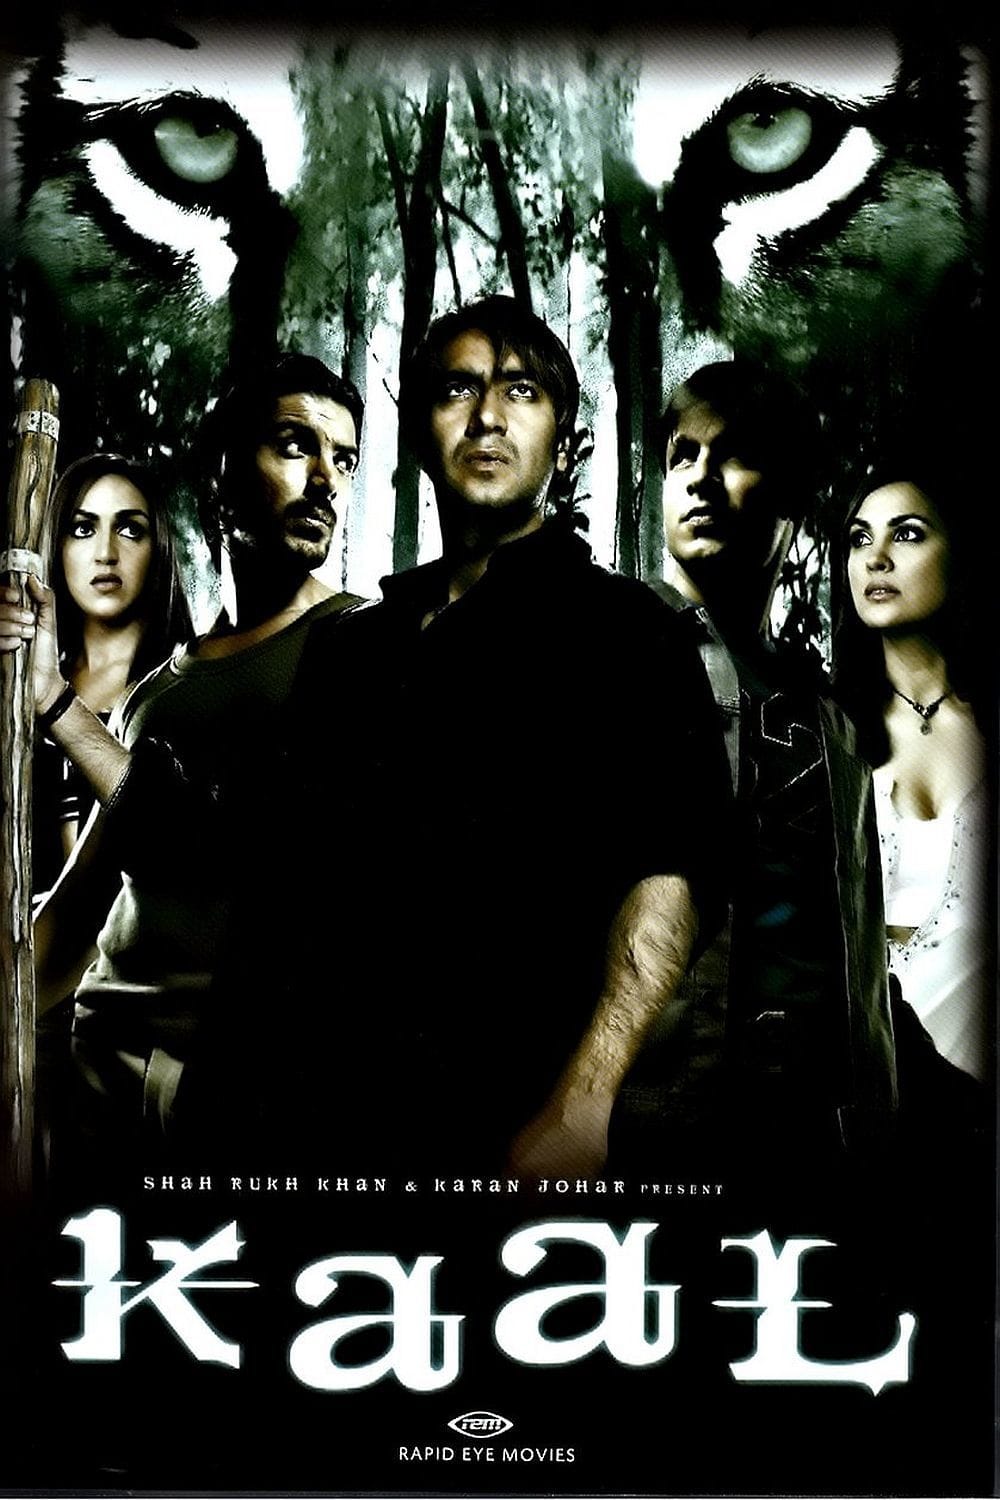 Poster for the movie "Kaal"